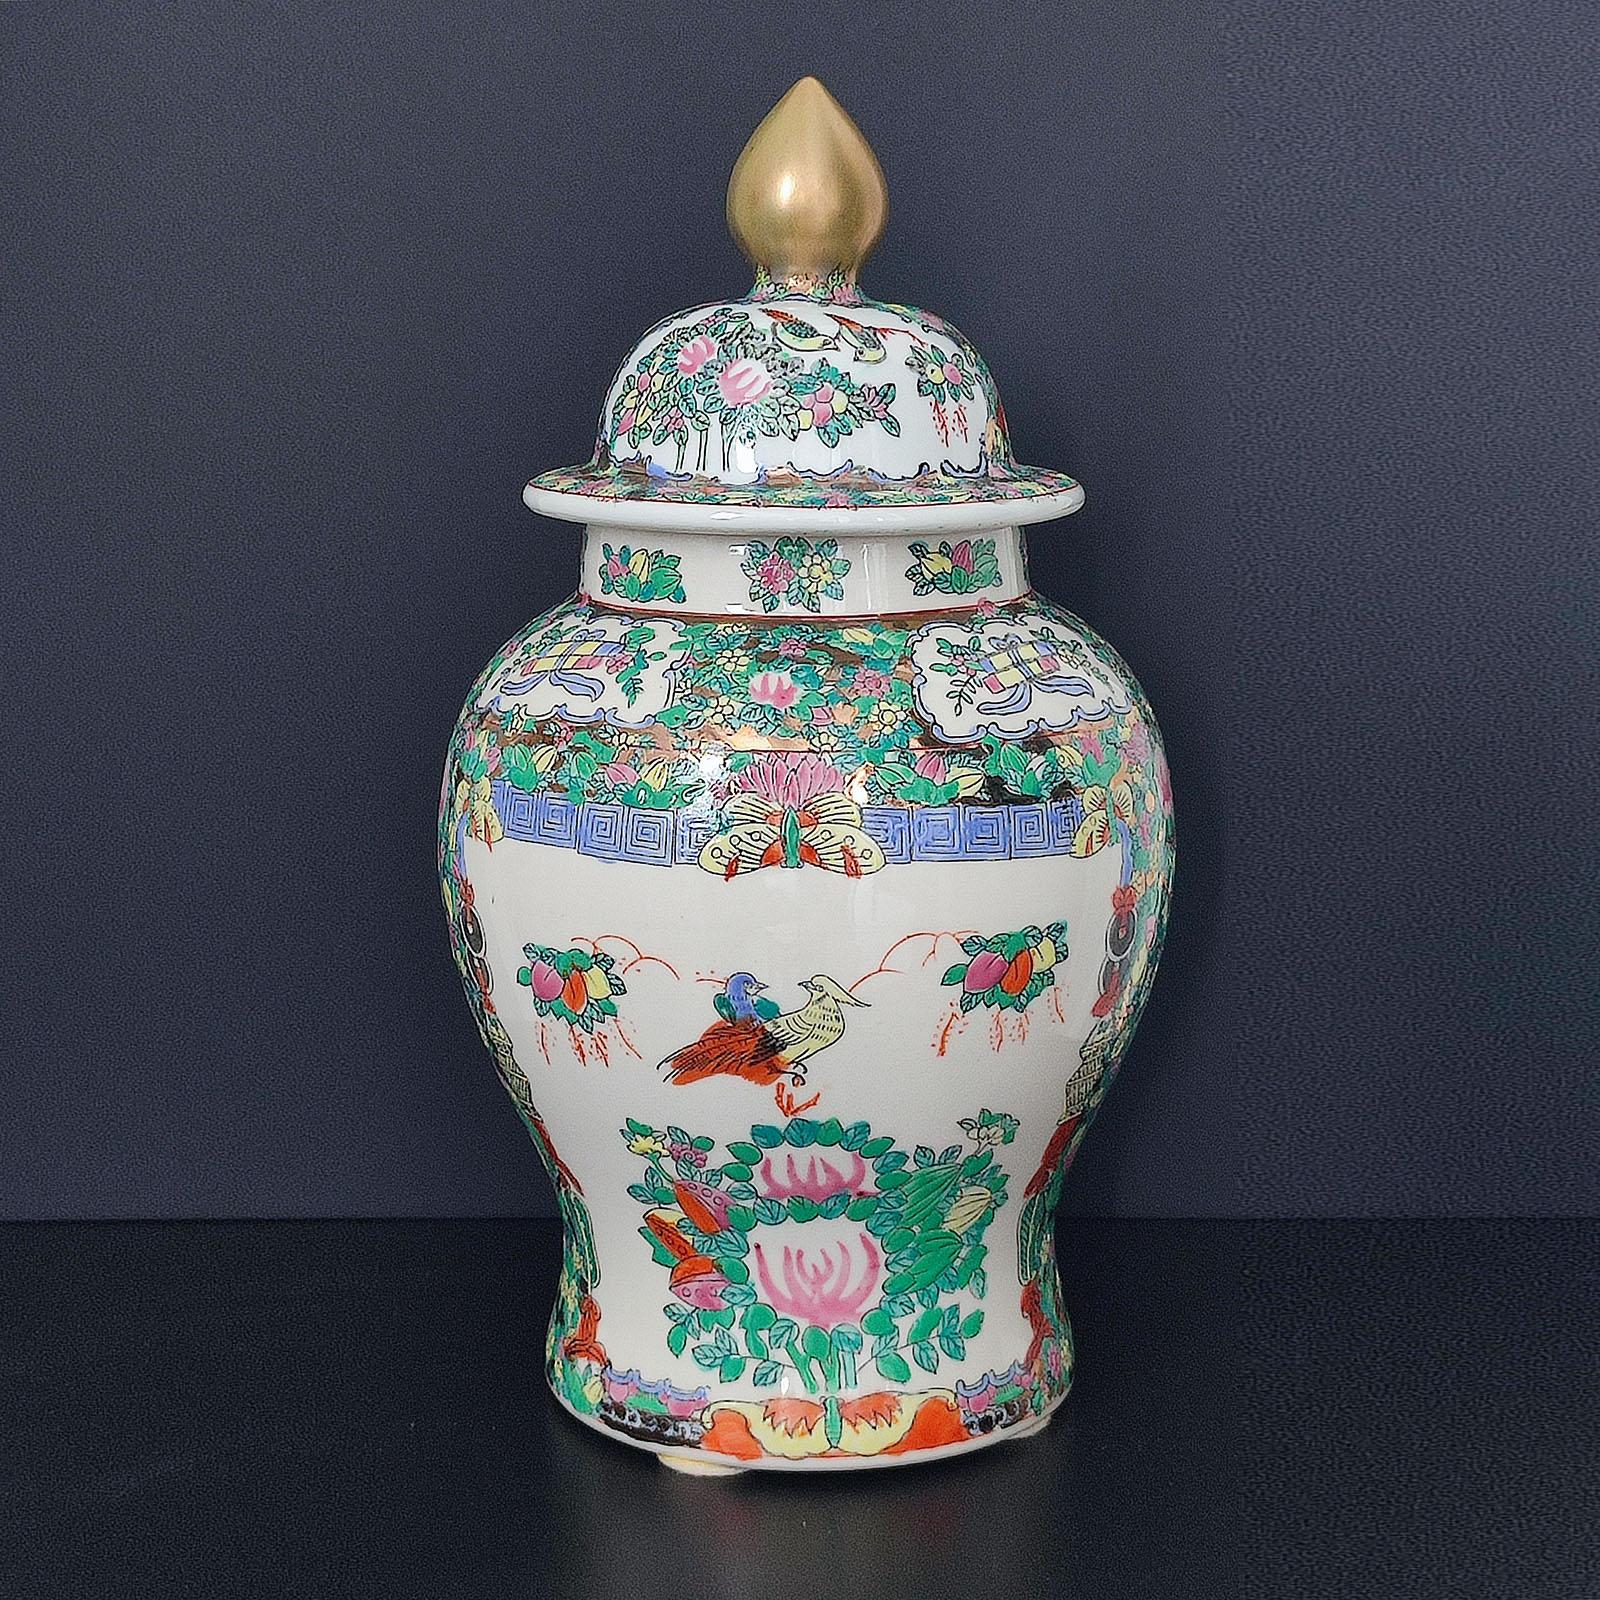 Large Chinese Famille Rose Lidded Jar
Enameled jar of very good large size and in lovely condition.
Vibrantly enameled overall with reserves of people, scenes, typical foliage, flowers, and insects.
Height 37 cm
Good used condition, normal wear.